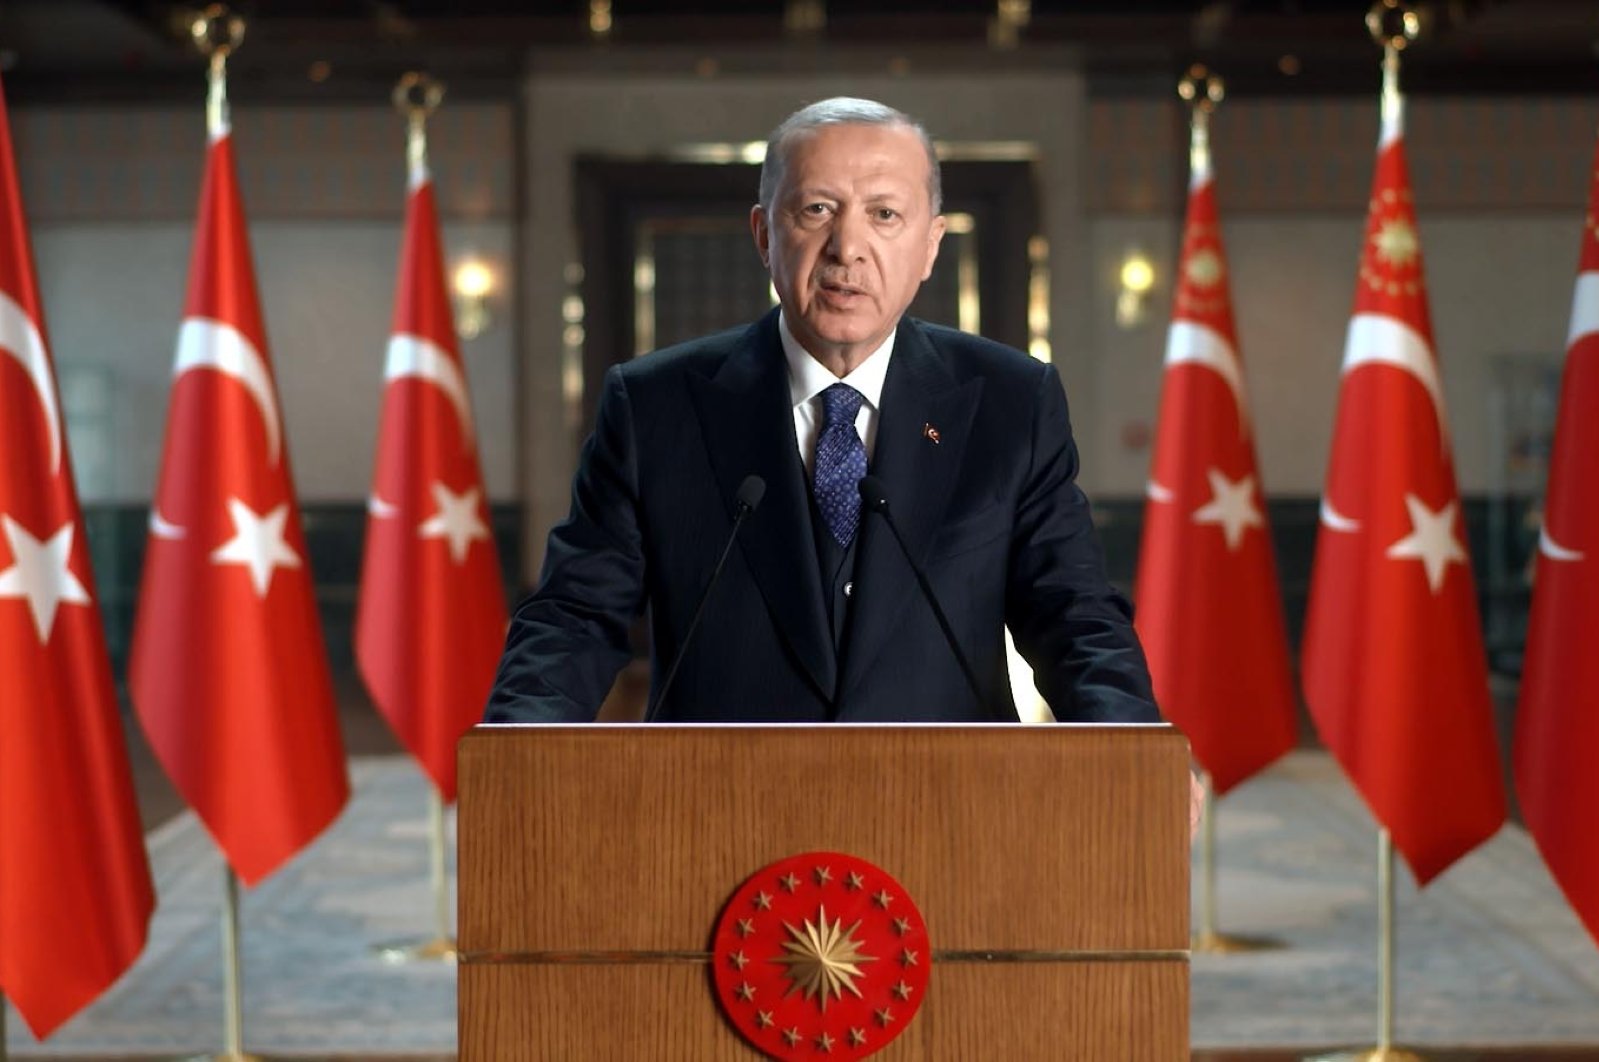 President Recep Tayyip Erdoğan speaks in a video message to the 37th Standing Committee for Economic and Commercial Cooperation of the Organization of the Islamic Cooperation (COMCEC) in Istanbul, Turkey, Nov. 24, 2021. (DHA Photo)